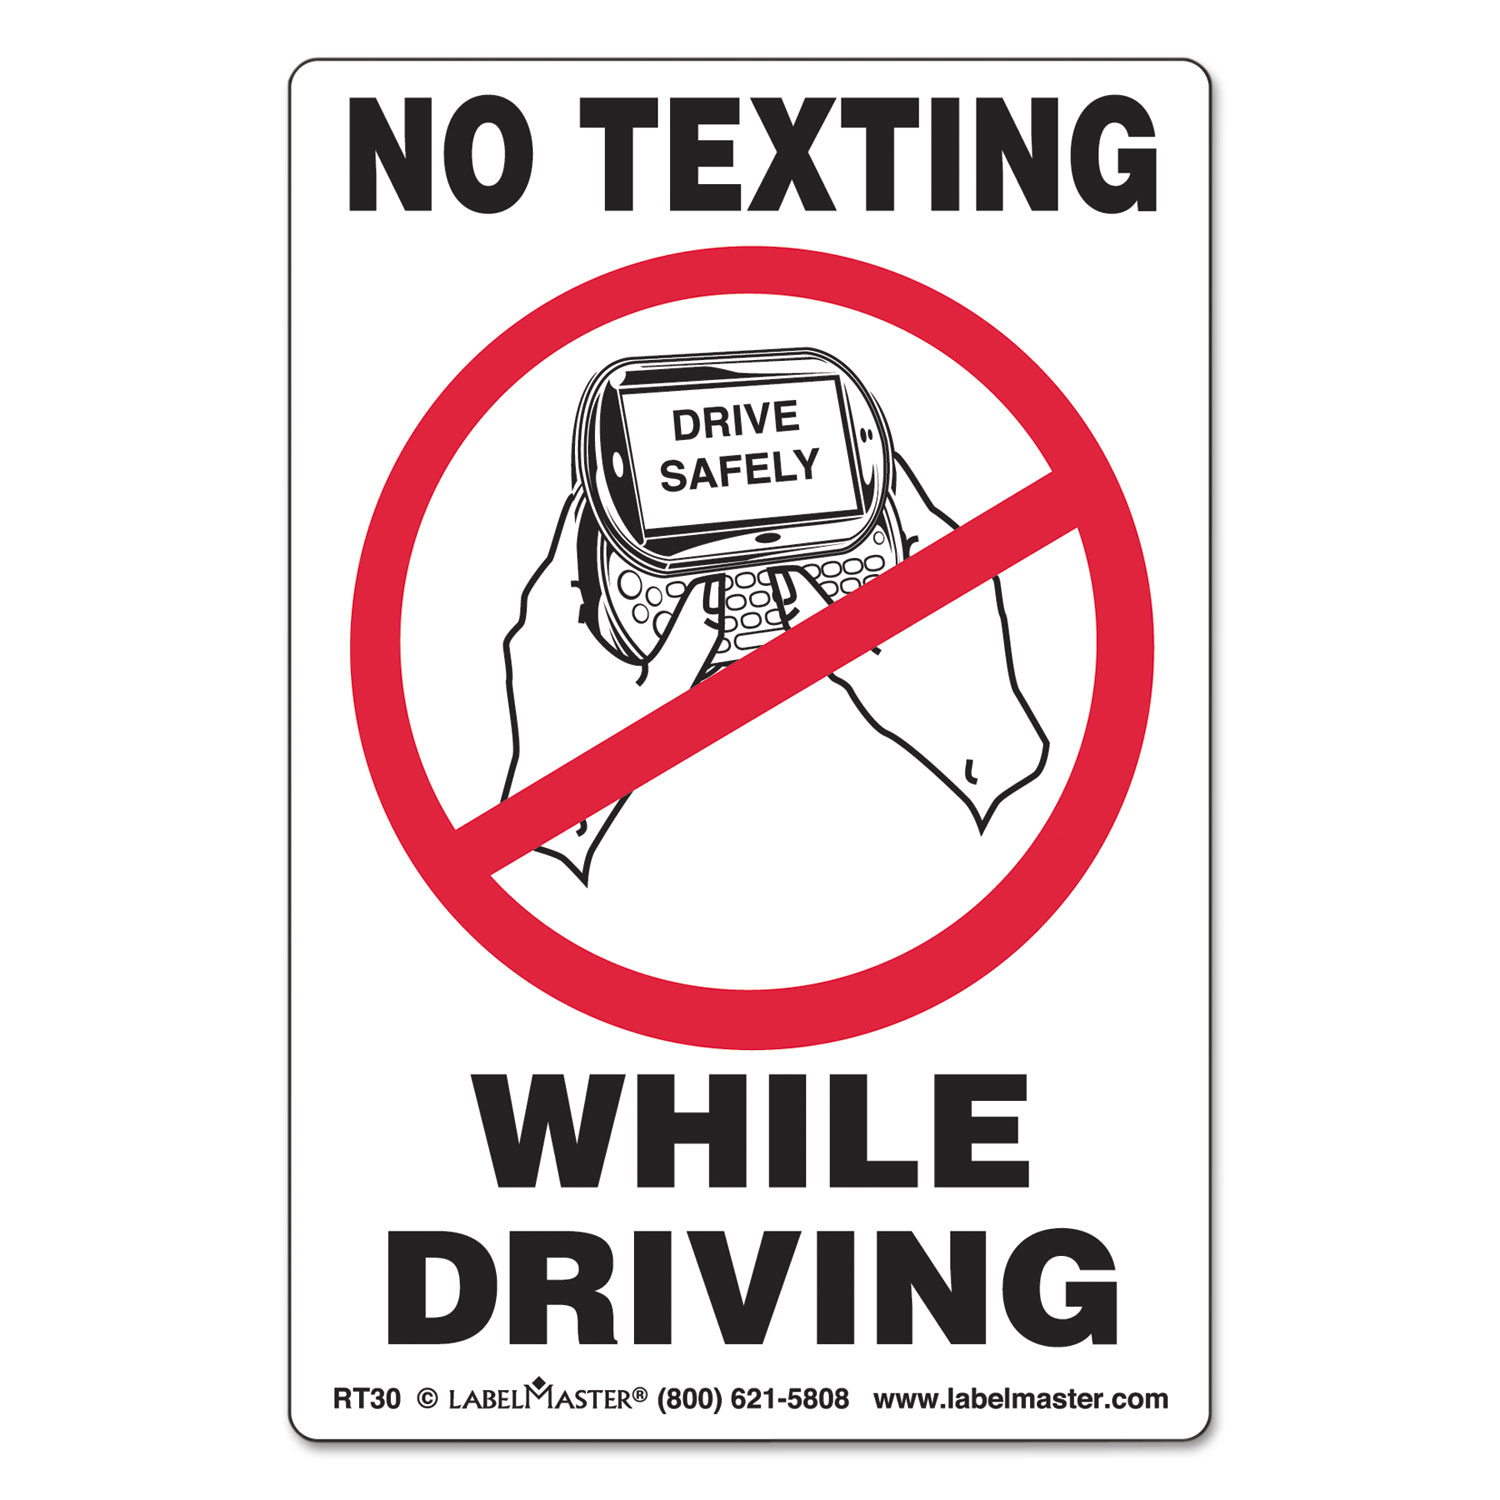  LabelMaster RT30 No Texting Self-Adhesive Labels, NO TEXTING WHILE DRIVING, 6.5 x 4.5, White/Black/Red, 500/Roll (LMTRT30) 